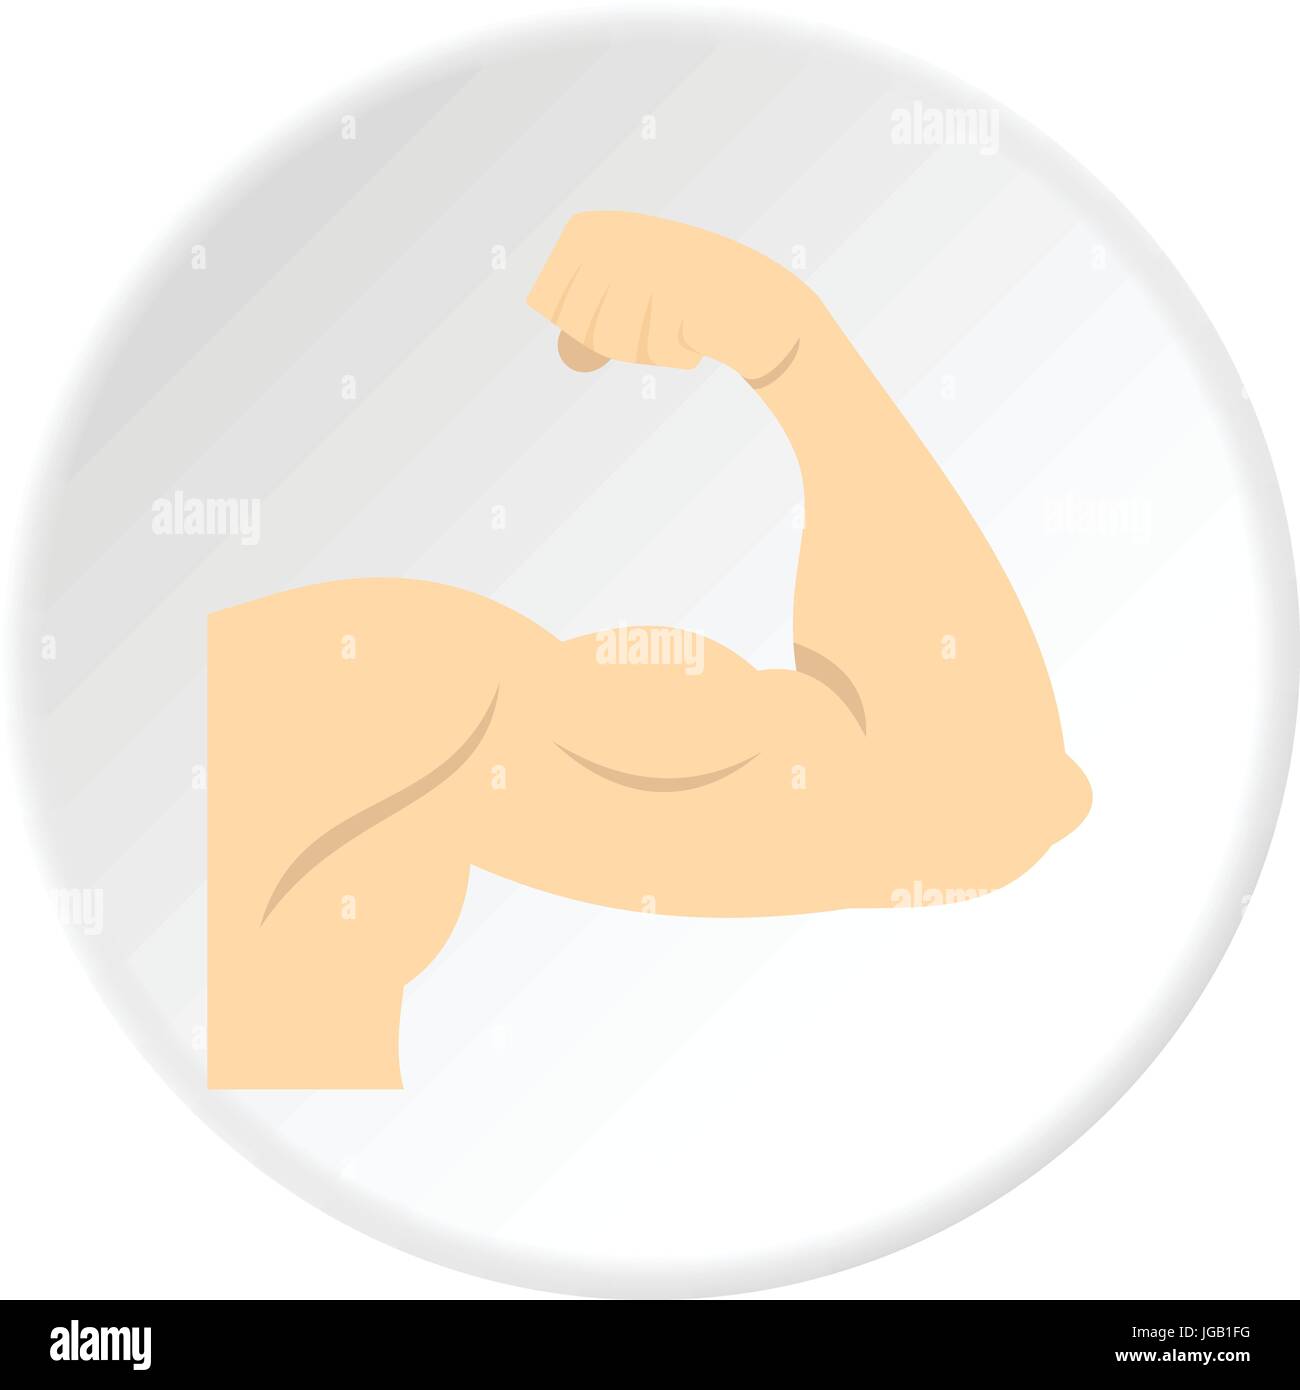 Arm showing biceps muscle icon circle Stock Vector